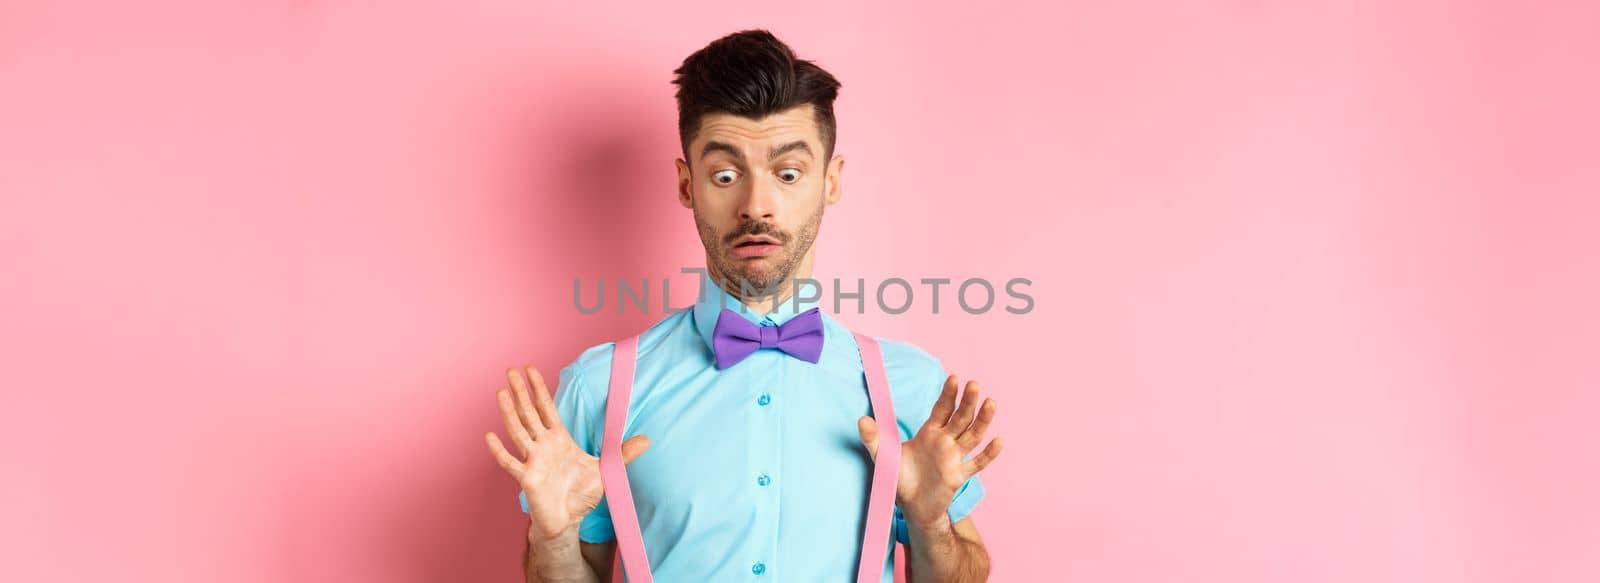 Funny guy with moustache and bow-tie, adjusting his suspenders and looking down with confused and surprised face, standing over pink background.